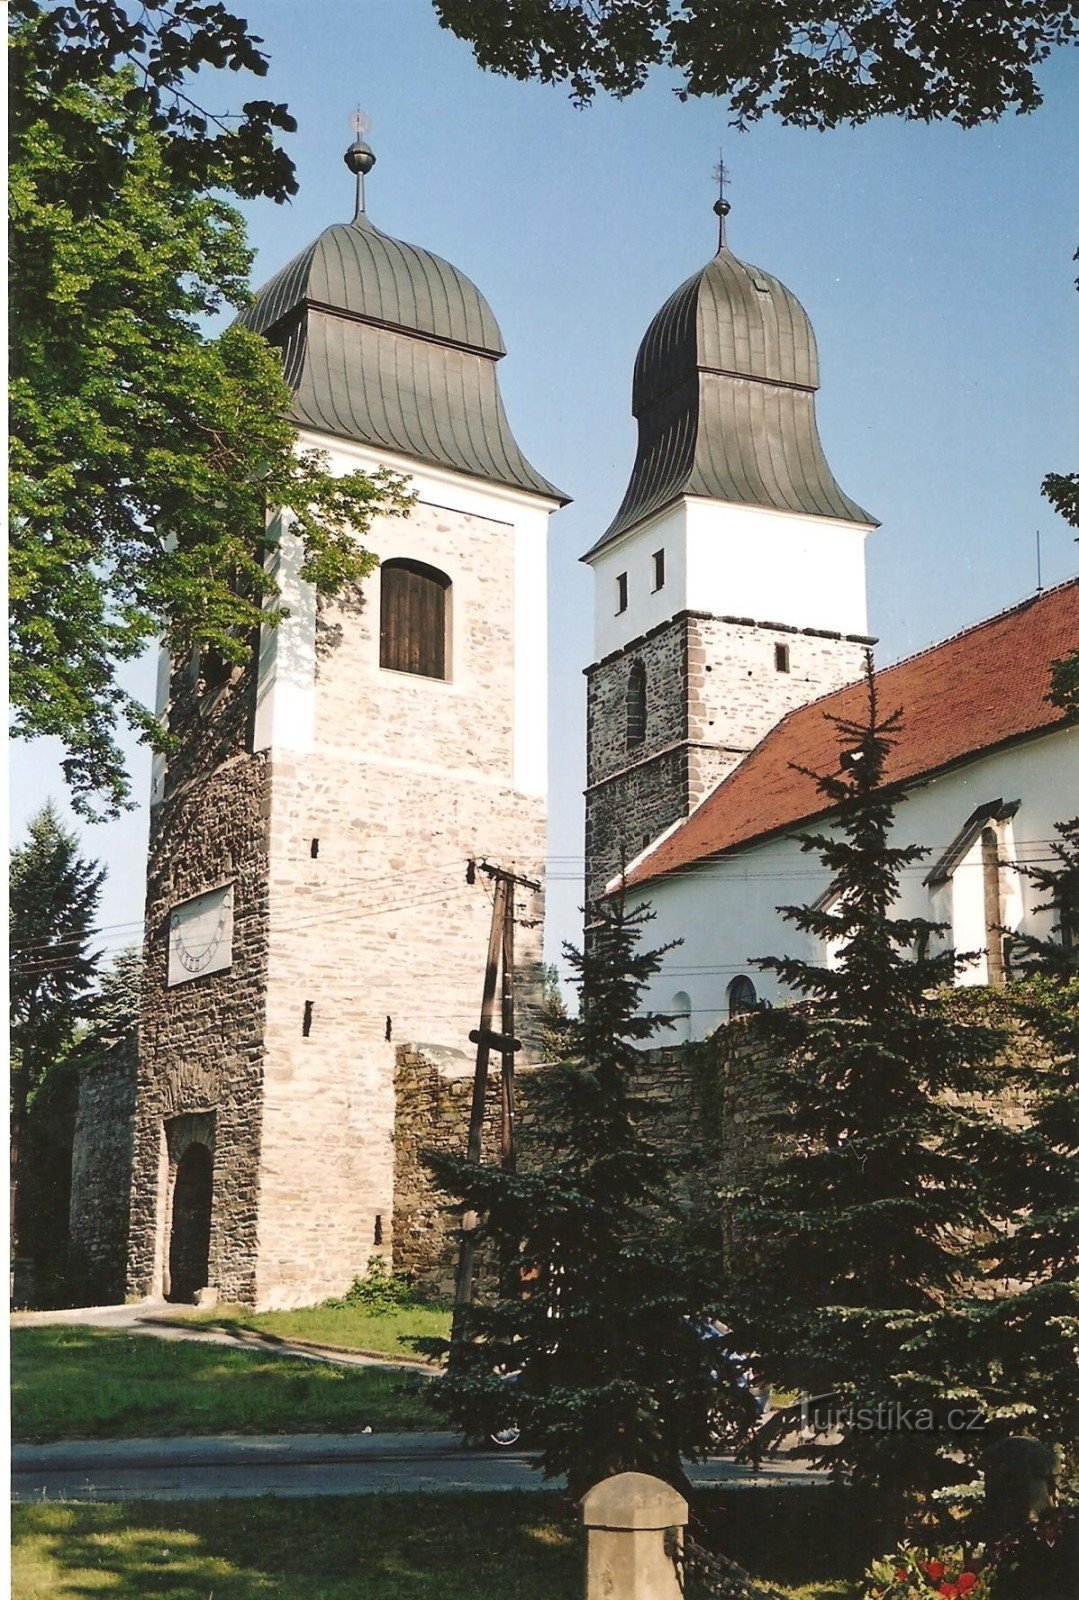 The castle tower at the church of St. John the Baptist